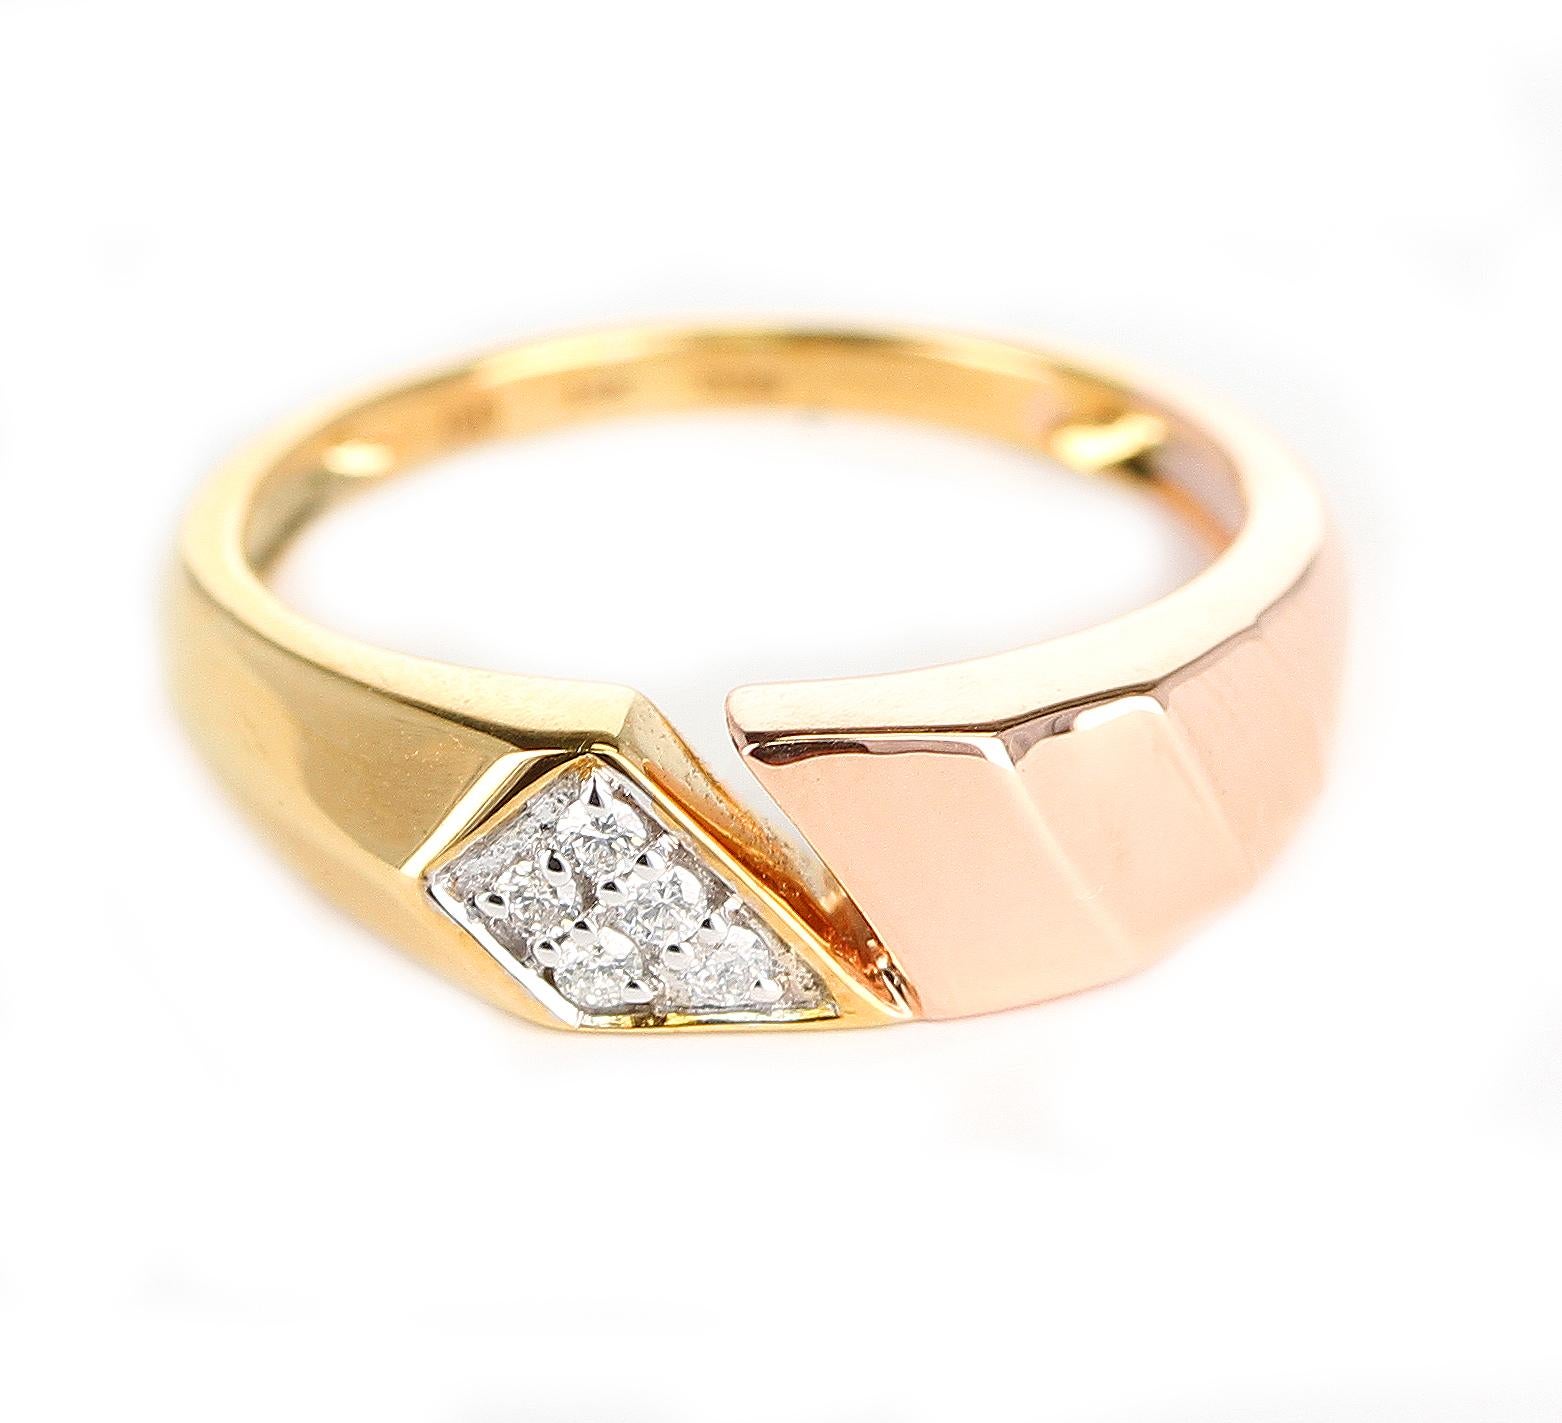 A trendy and every-day wear ring with a slanted design of 14K Yellow and Rose Gold and Diamonds. Diamond Weight: 0.08 cts. Ring size: 6. Signed D'D for D'Deco Jewels.